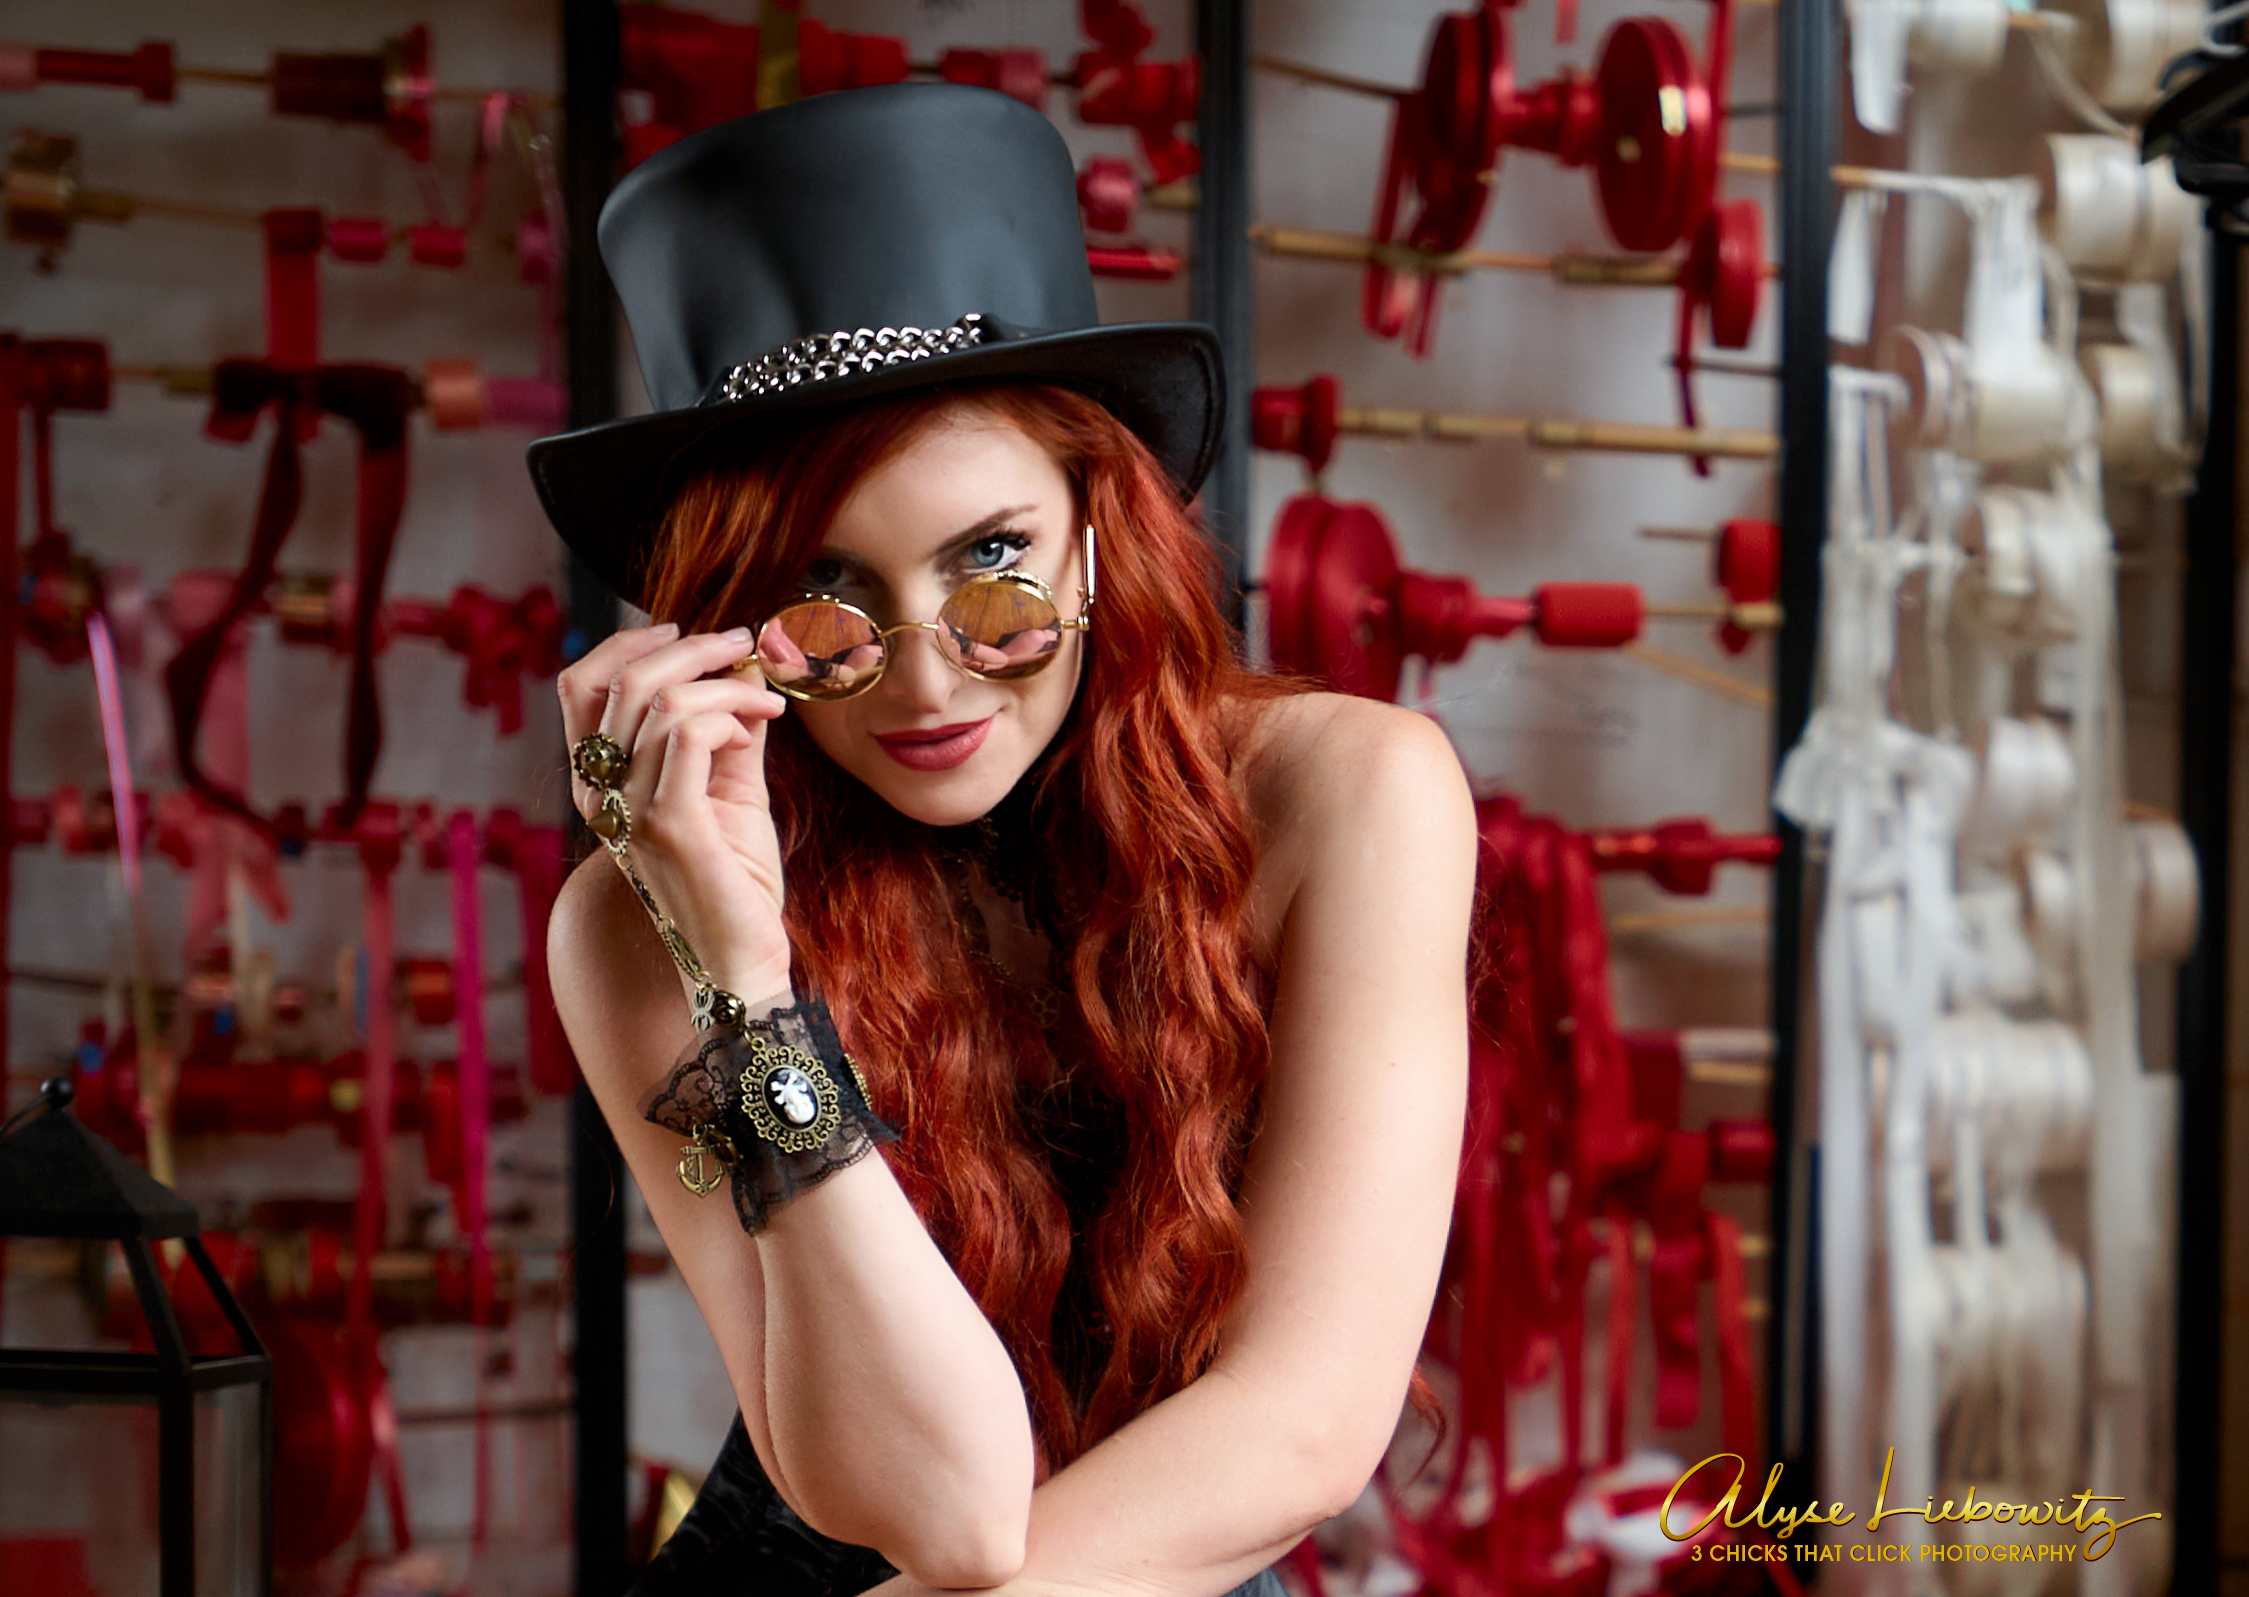 Model Cat Ross at the Art Factory, Paterson, NJ - Steampunk! Photographed by 3 Chicks That Click Photography